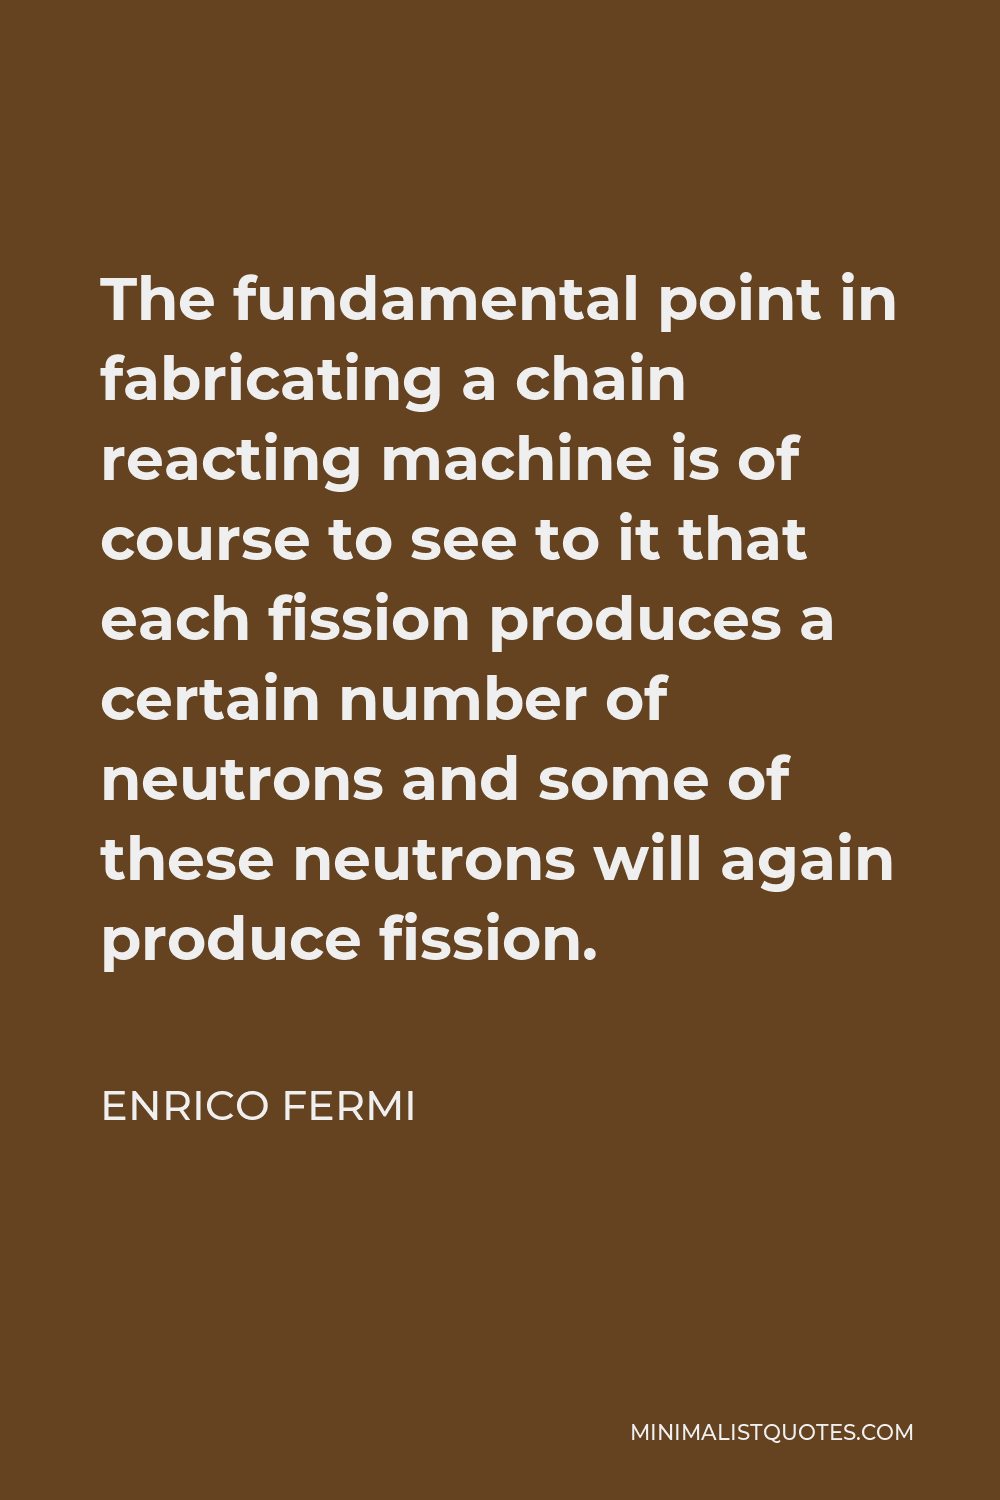 Enrico Fermi Quote - The fundamental point in fabricating a chain reacting machine is of course to see to it that each fission produces a certain number of neutrons and some of these neutrons will again produce fission.